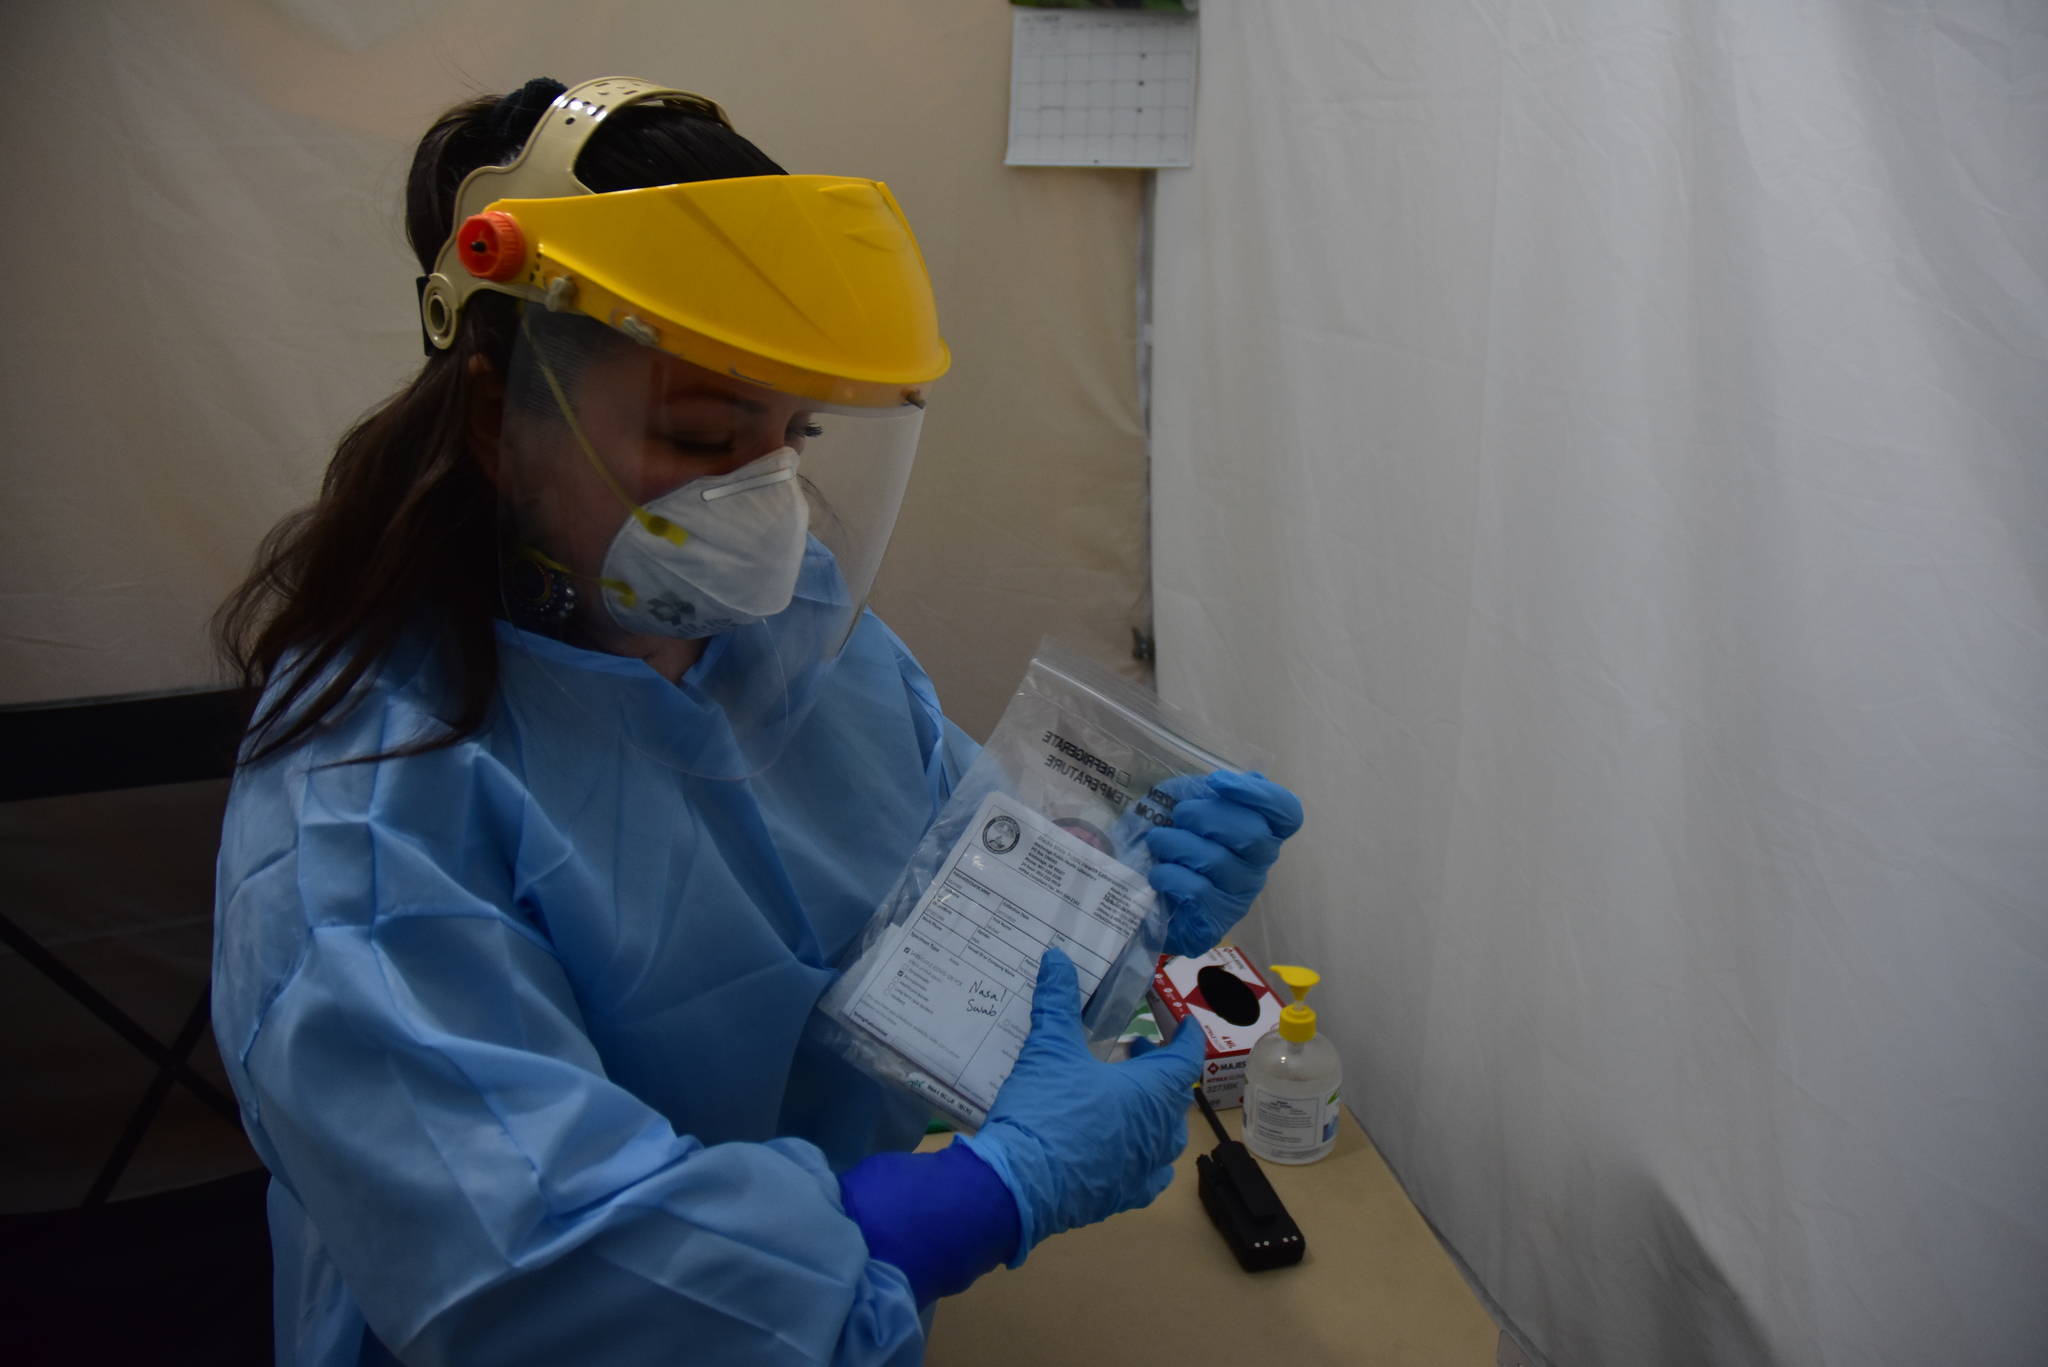 Emergency worker Melanie Chavez takes a COVID-19 test sample at the Juneau International Airport screening site on Monday, Oct. 12, 2020. The City and Borough of Juneau raised its health alert level Tuesday as the number of cases grows locally and statewide. (Peter Segall / Juneau Empire)